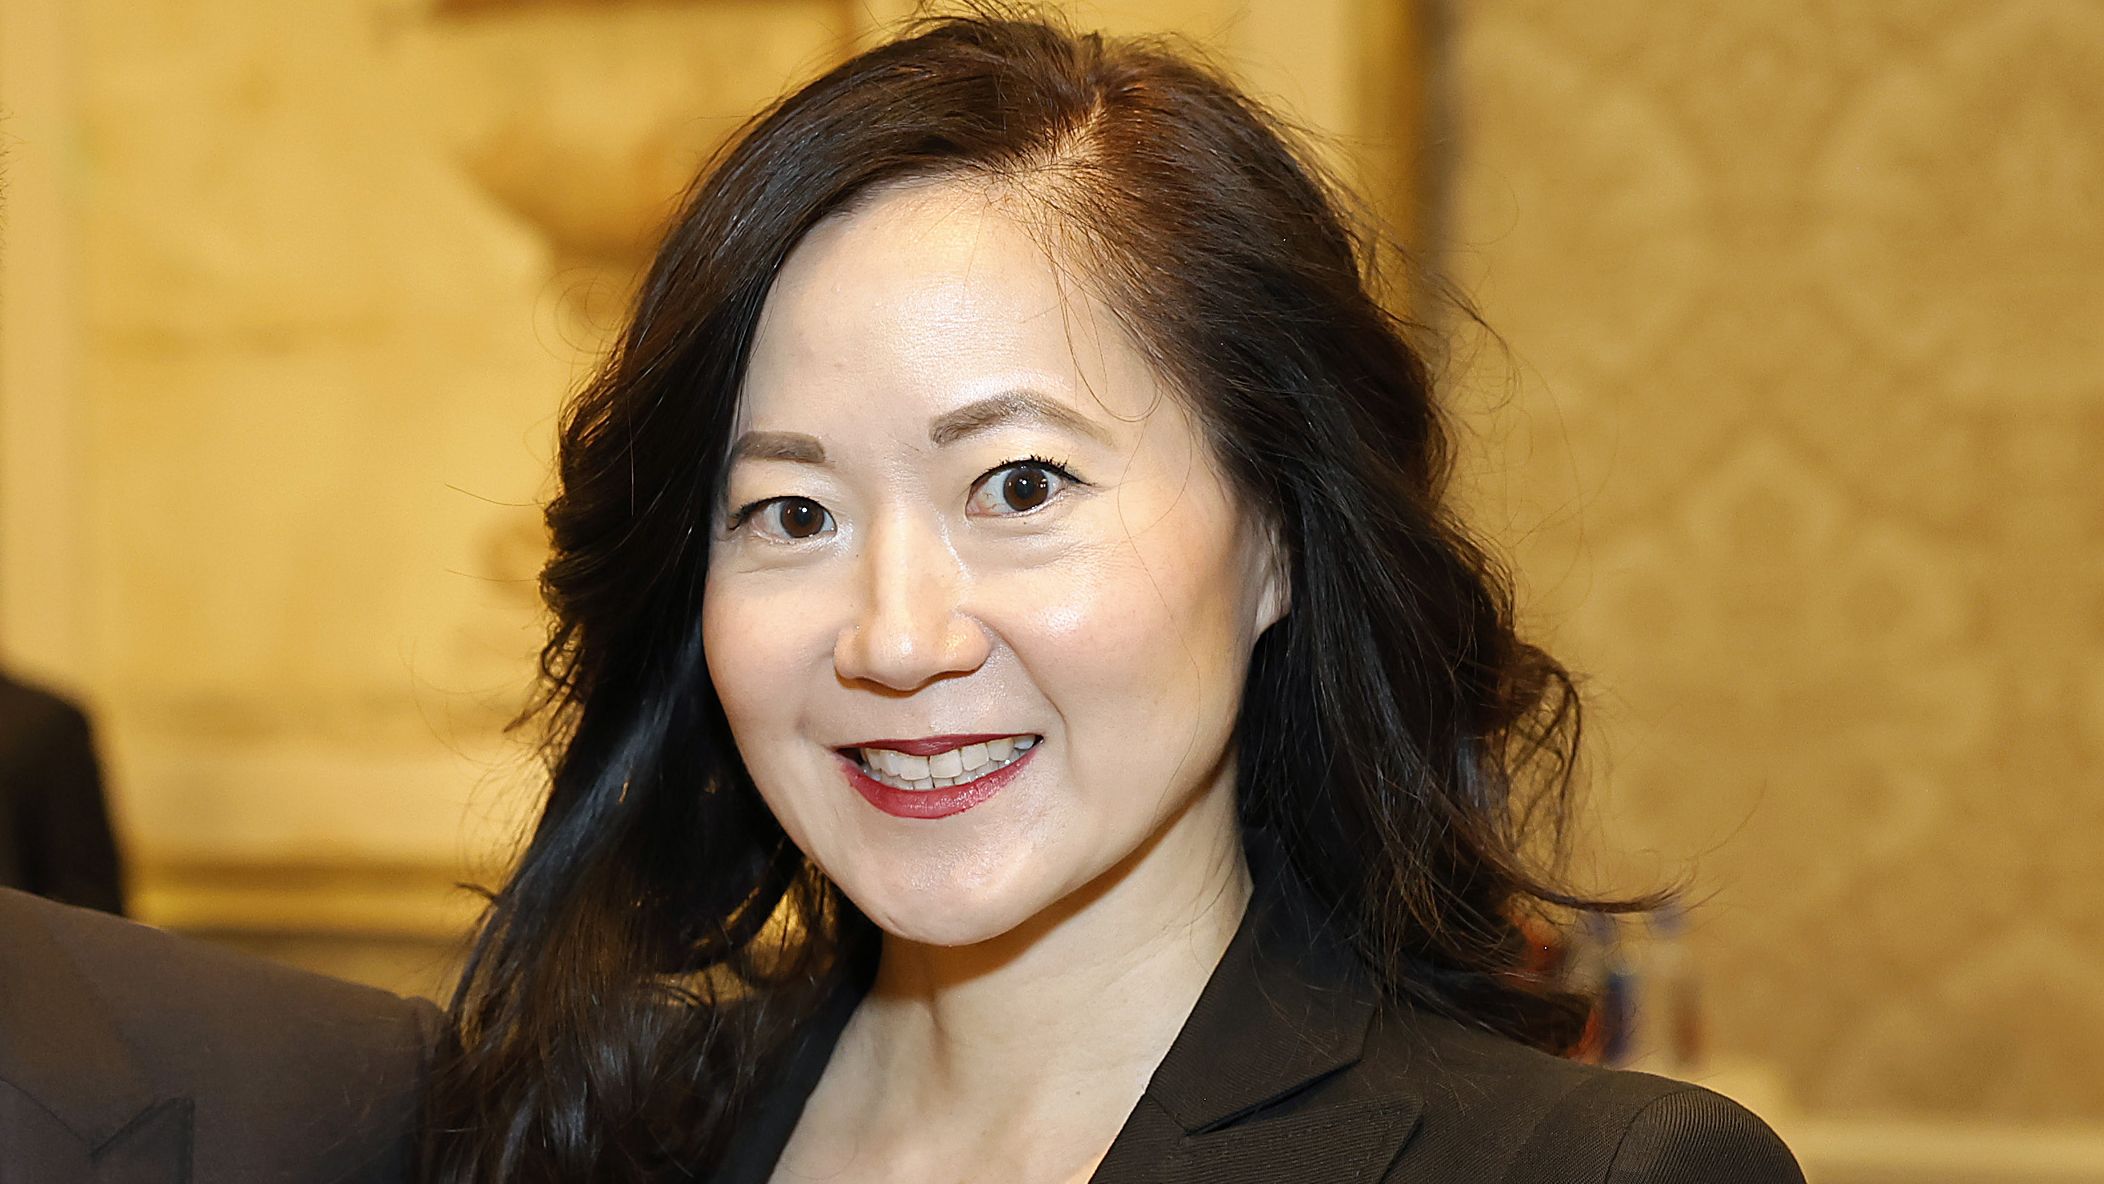 Angela Chao, CEO of the shipping company the Foremost Group and sister of former US cabinet secretary Elaine Chao, has been killed in a car crash.